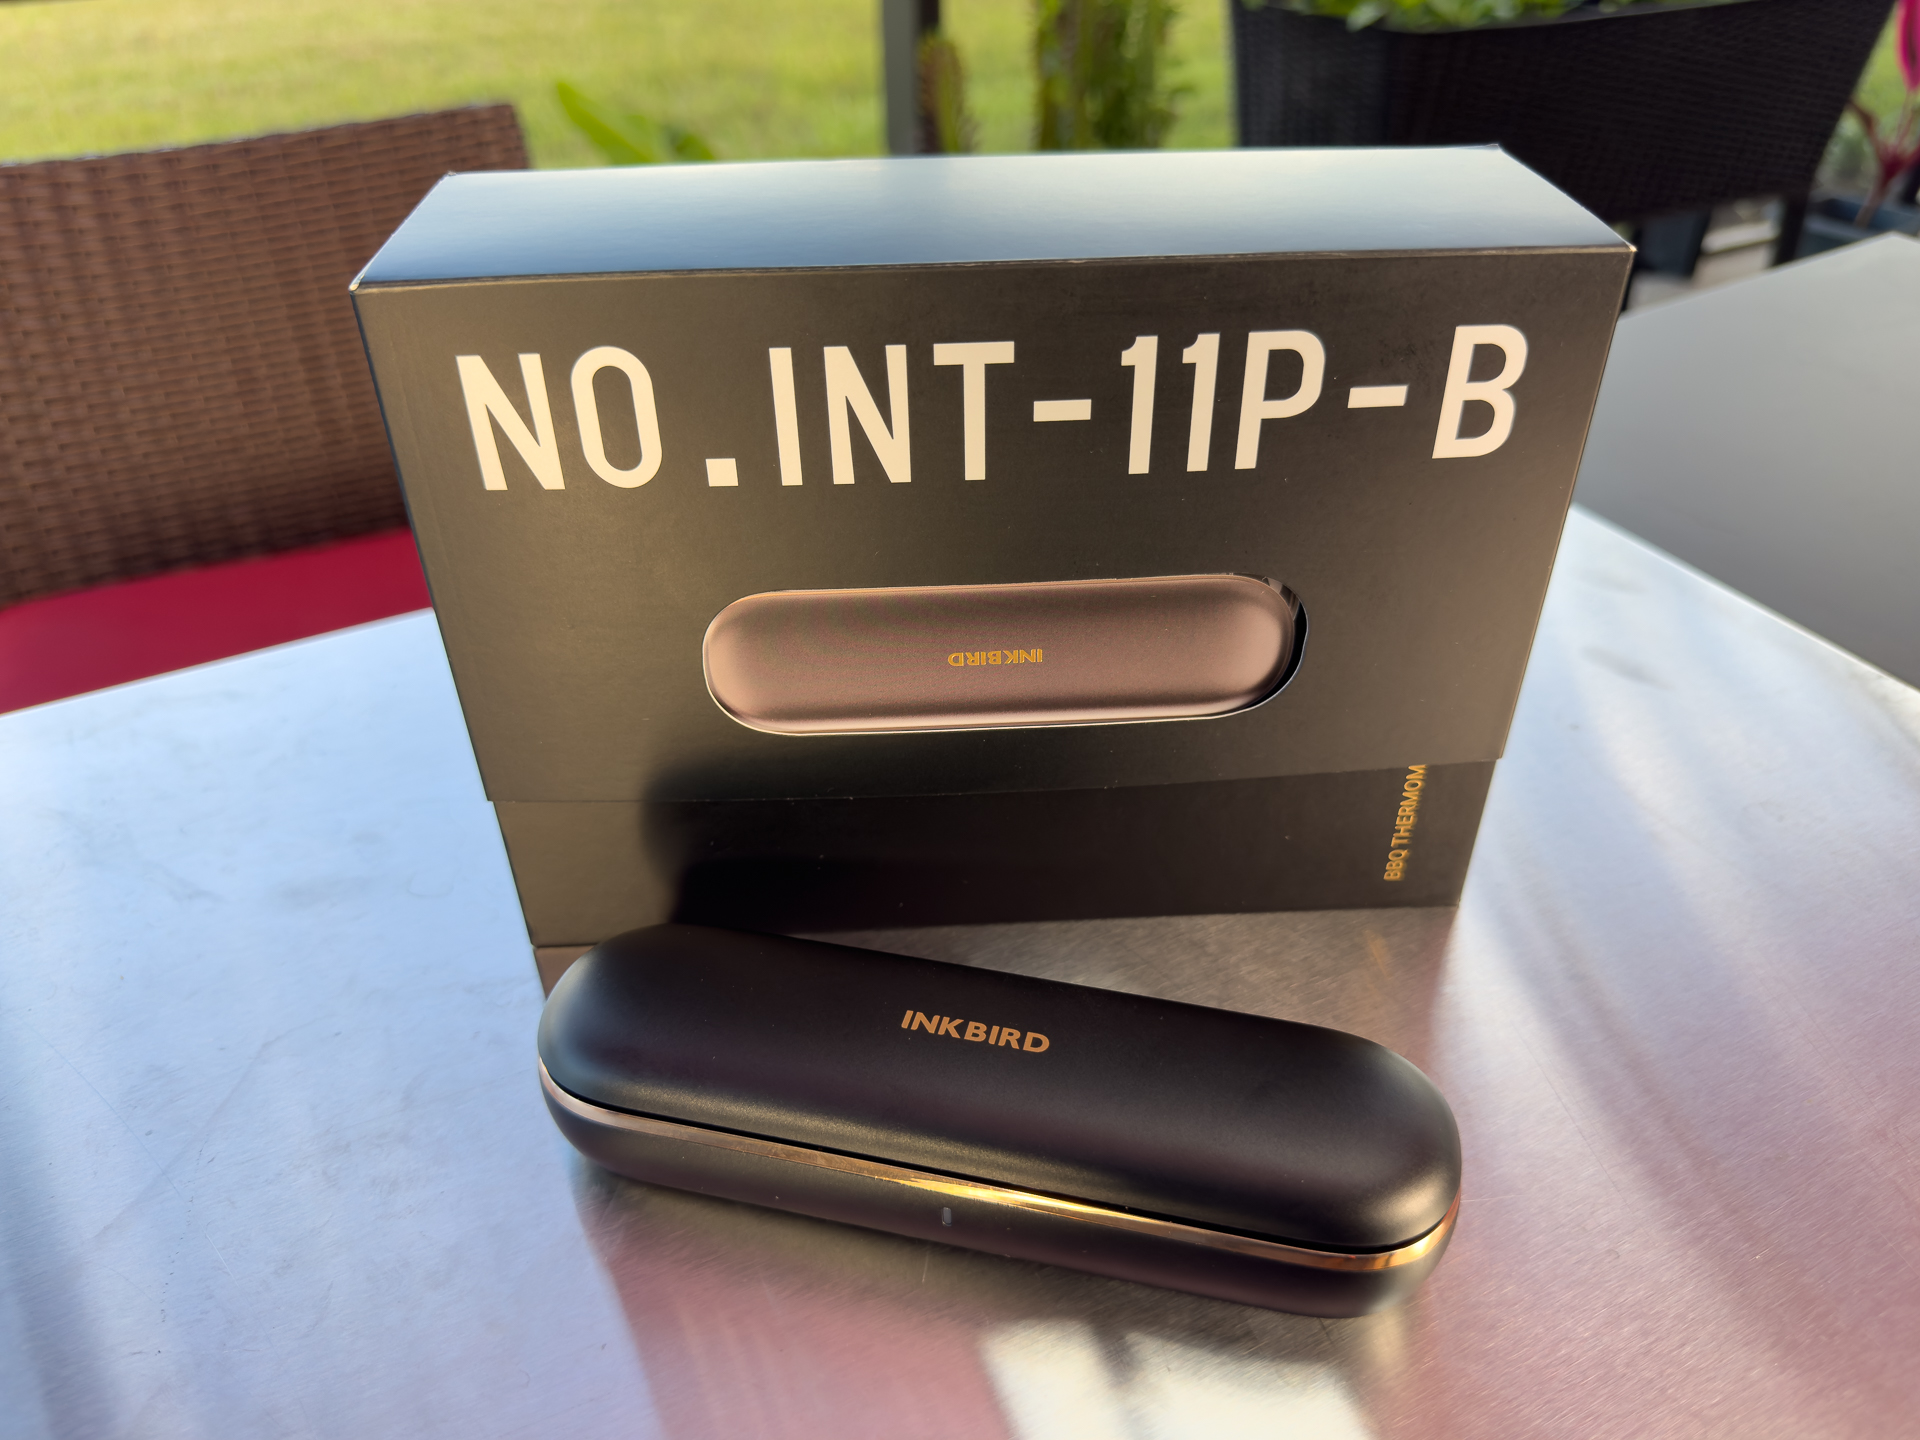 INKBIRD INT-11P-B Wireless Meat Thermometer Review & Test - Stef's